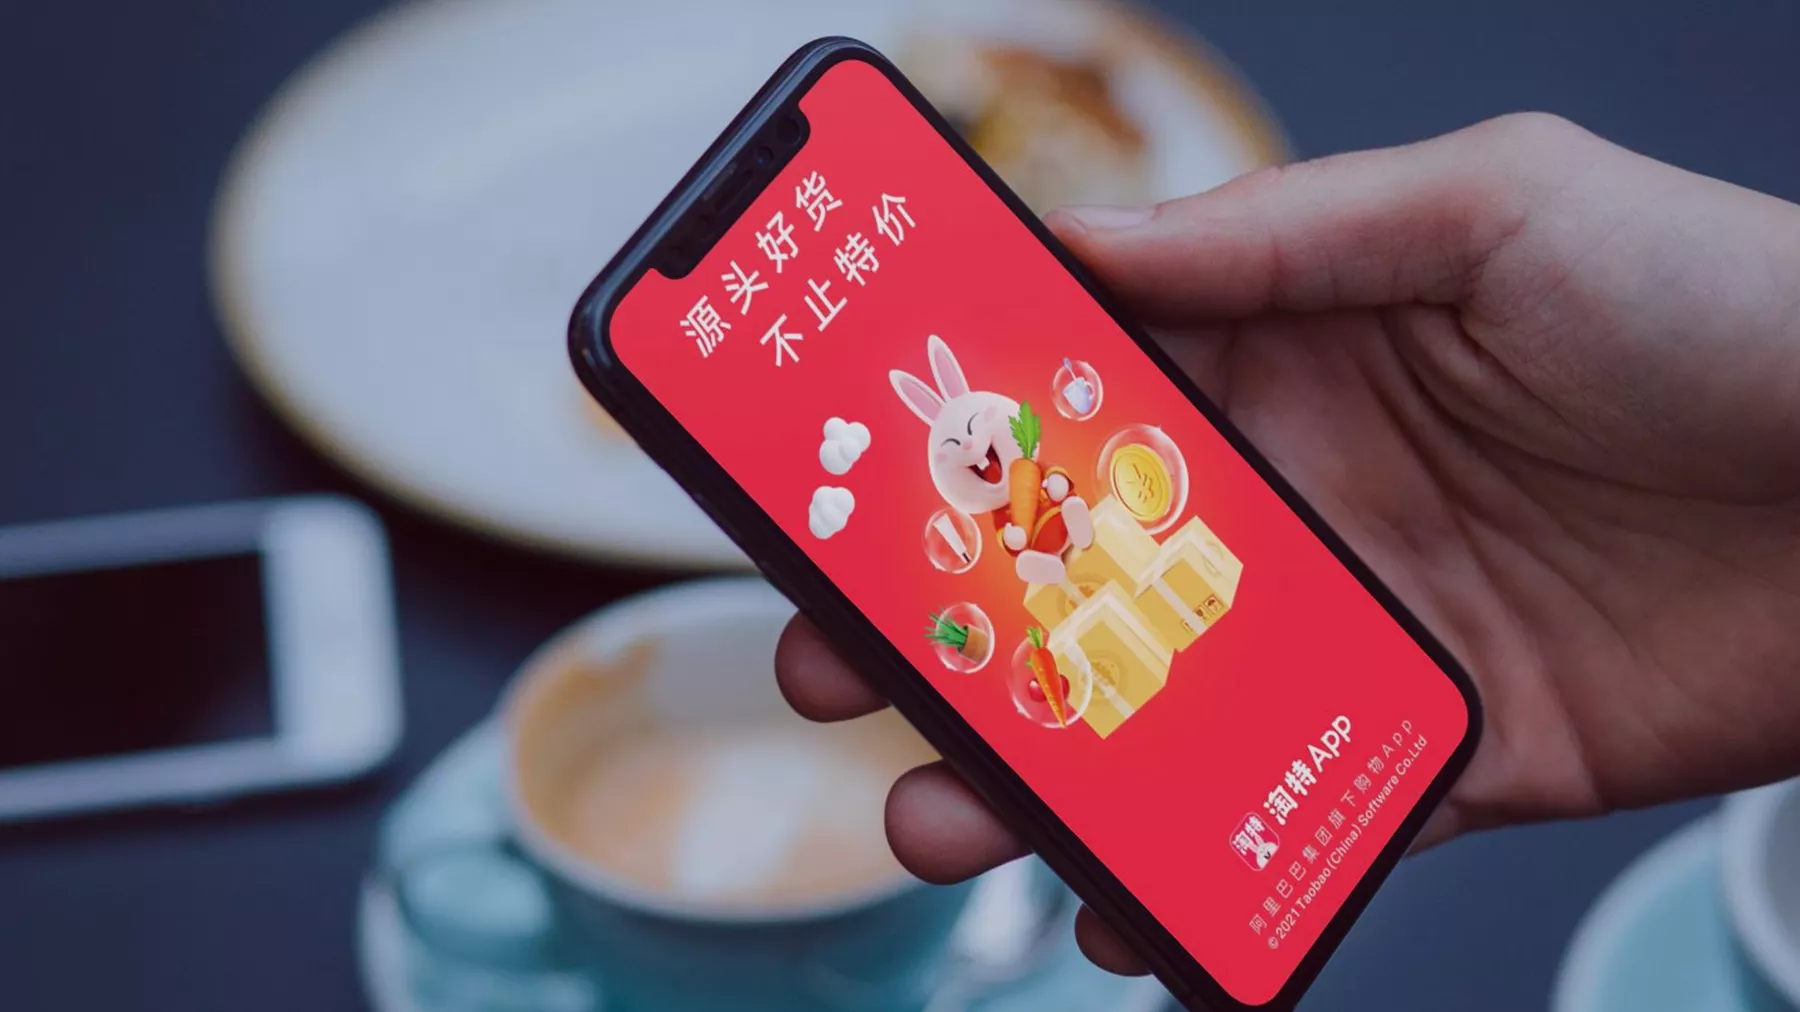 Alibaba News Roundup: Q1 Earnings; Social Responsibility Report; Win for Alibaba as a Workplace